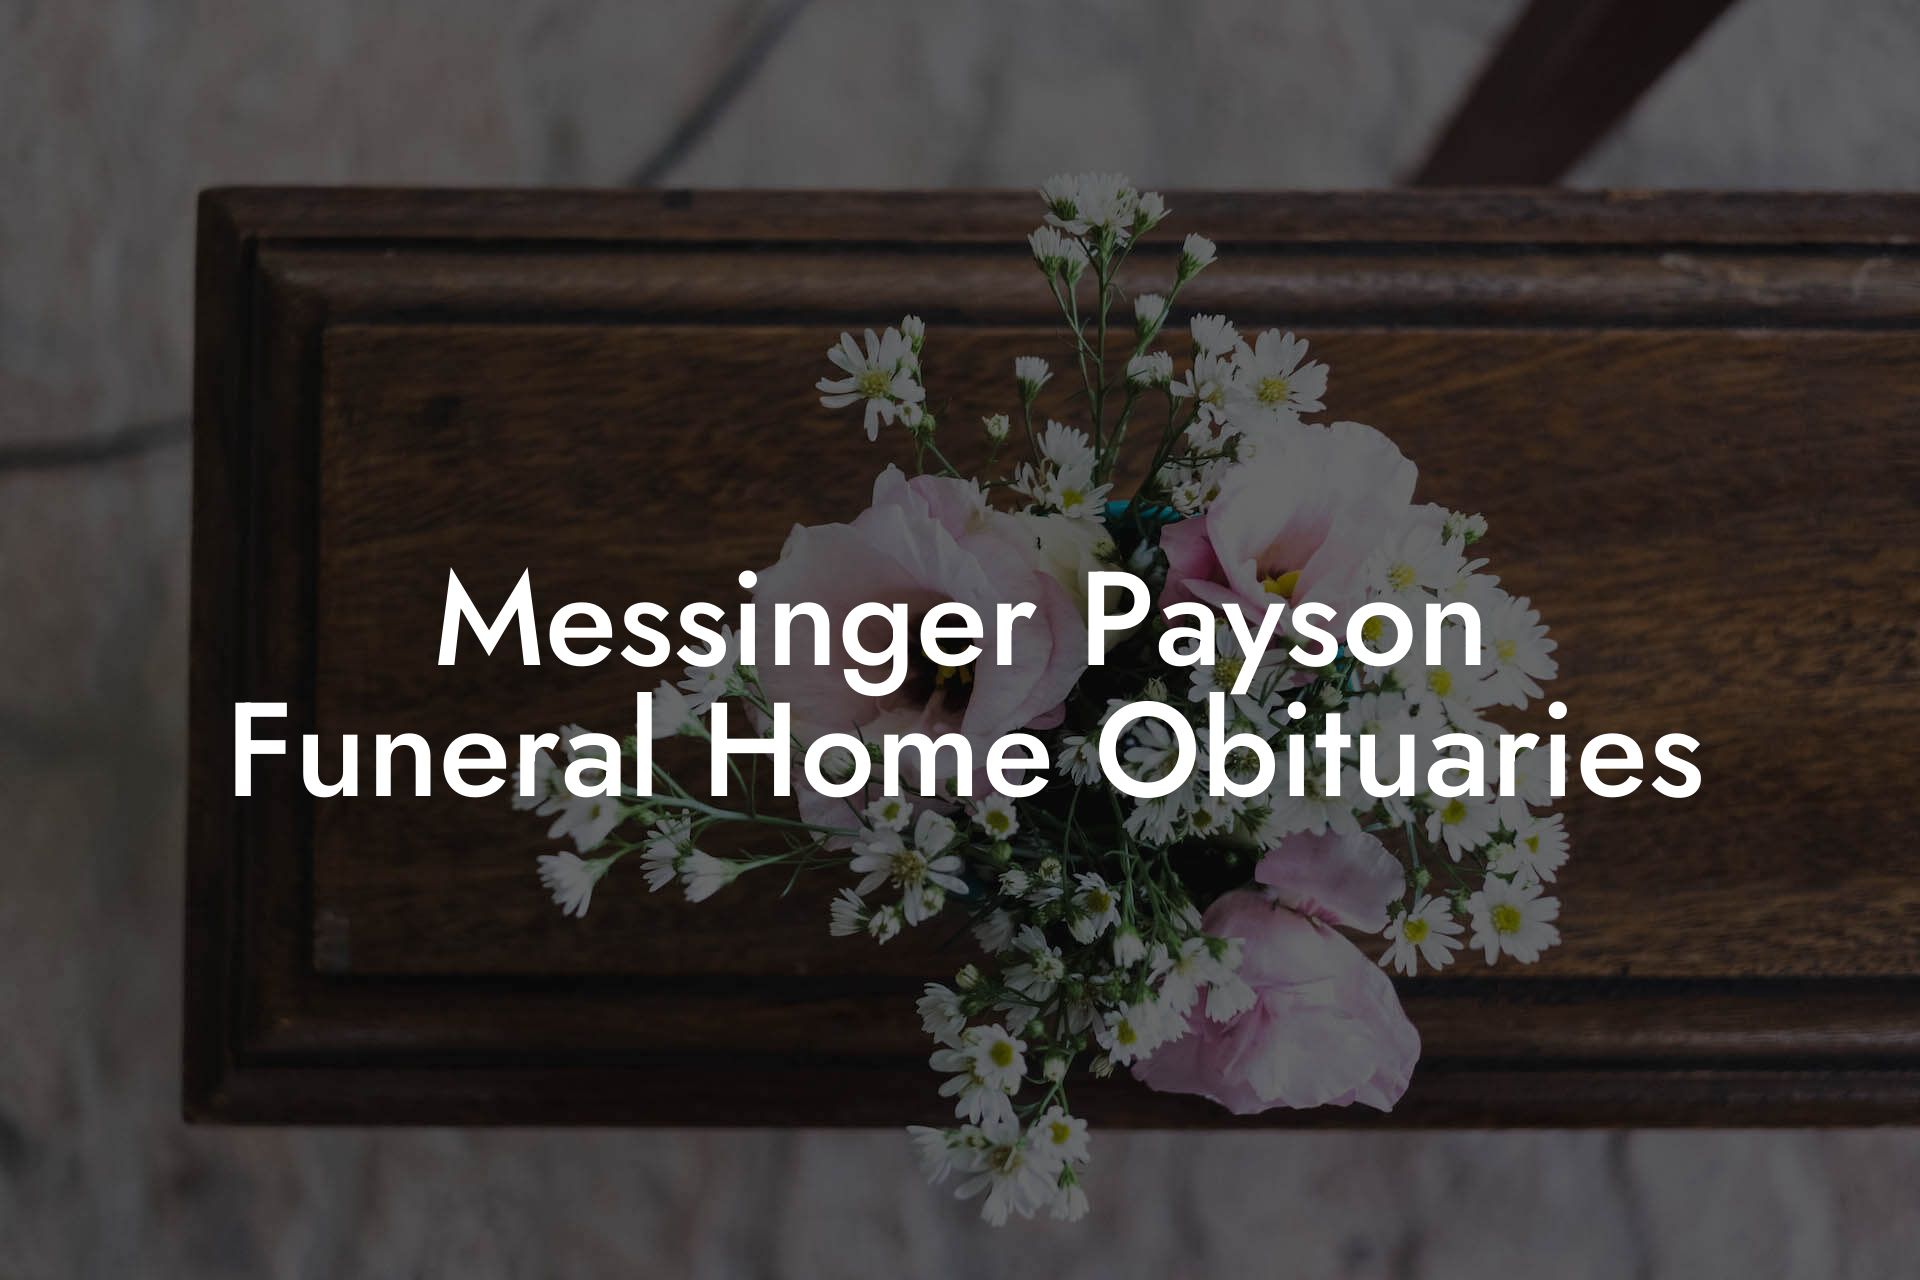 Messinger Payson Funeral Home Obituaries